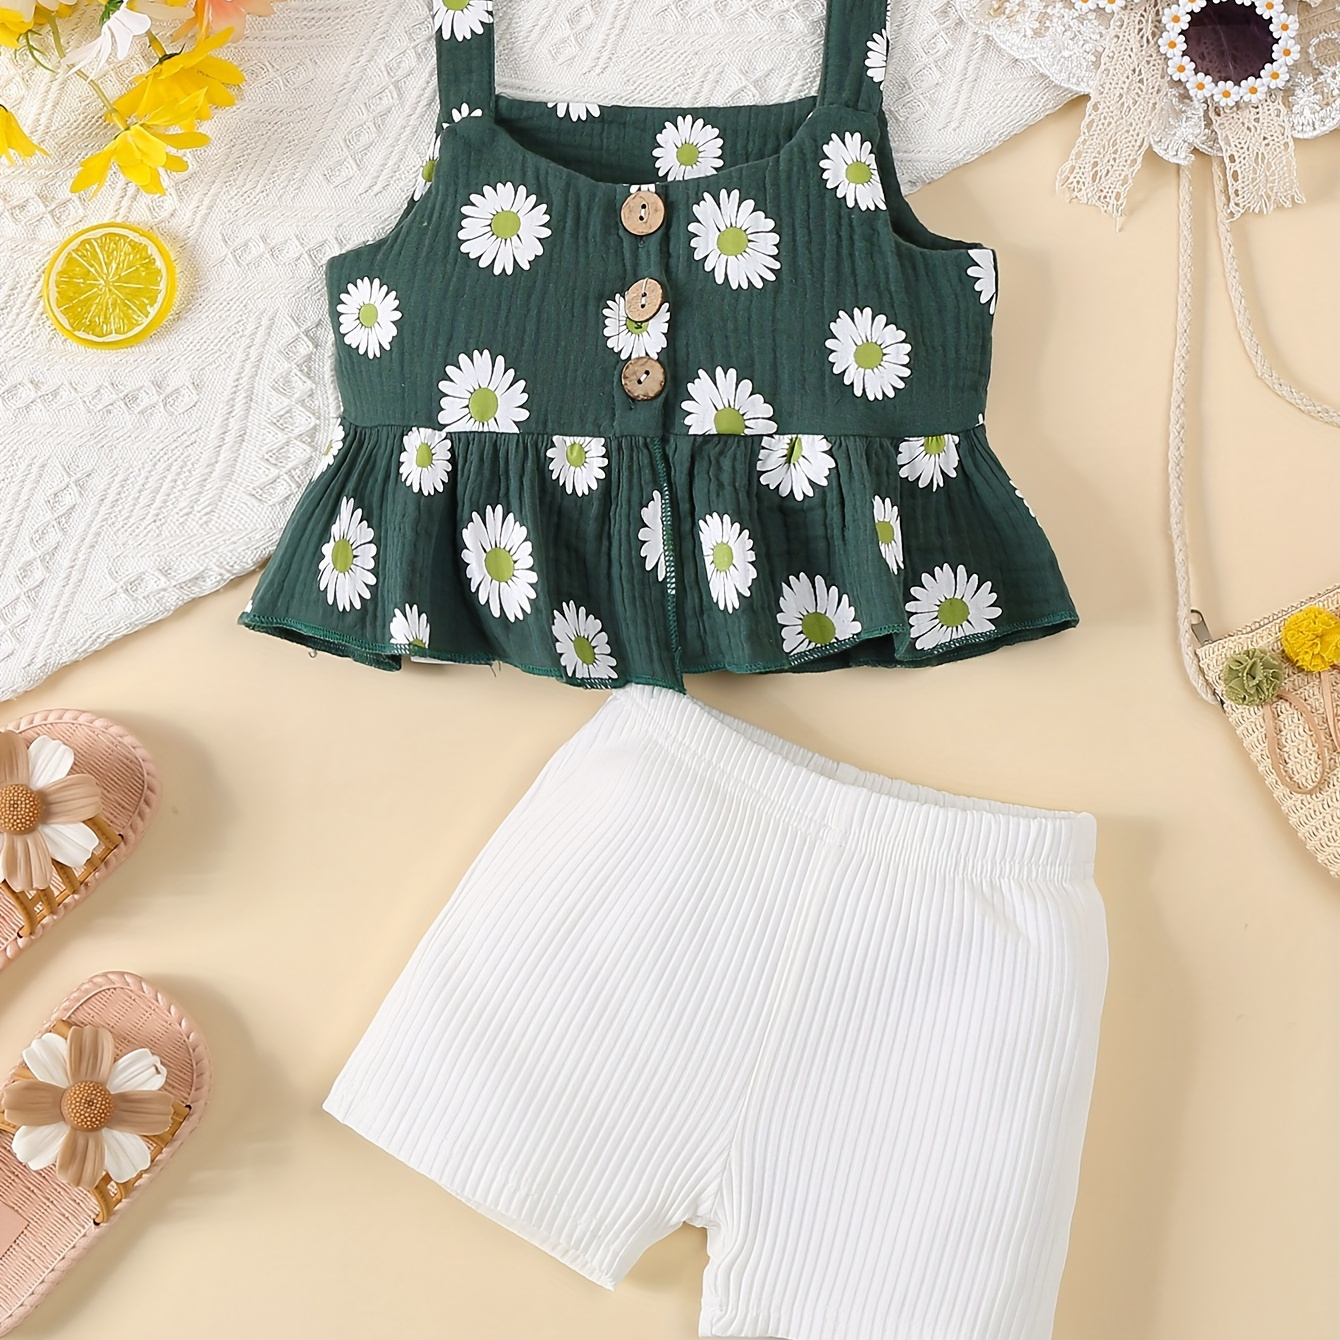 

2pcs Infant & Toddler's Casual Daisy Pattern Ribbed Muslin Set, Sleeveless Peplum Top & Shorts, Baby Girl's Clothes